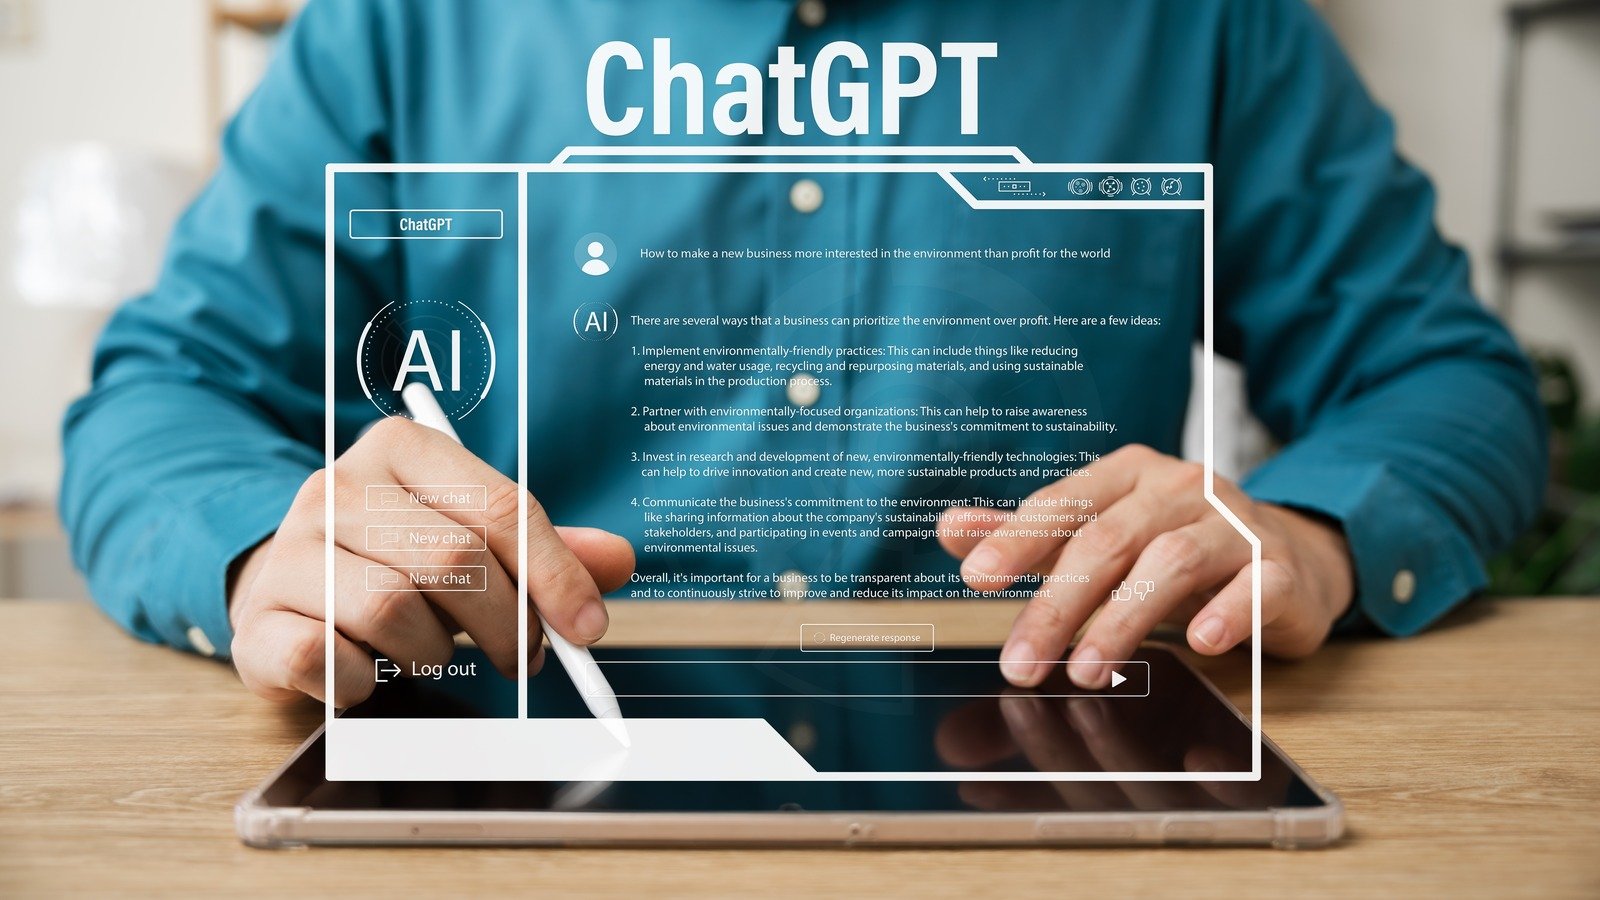 6 Unexpected Uses For ChatGPT You'll Want To Try For Yourself